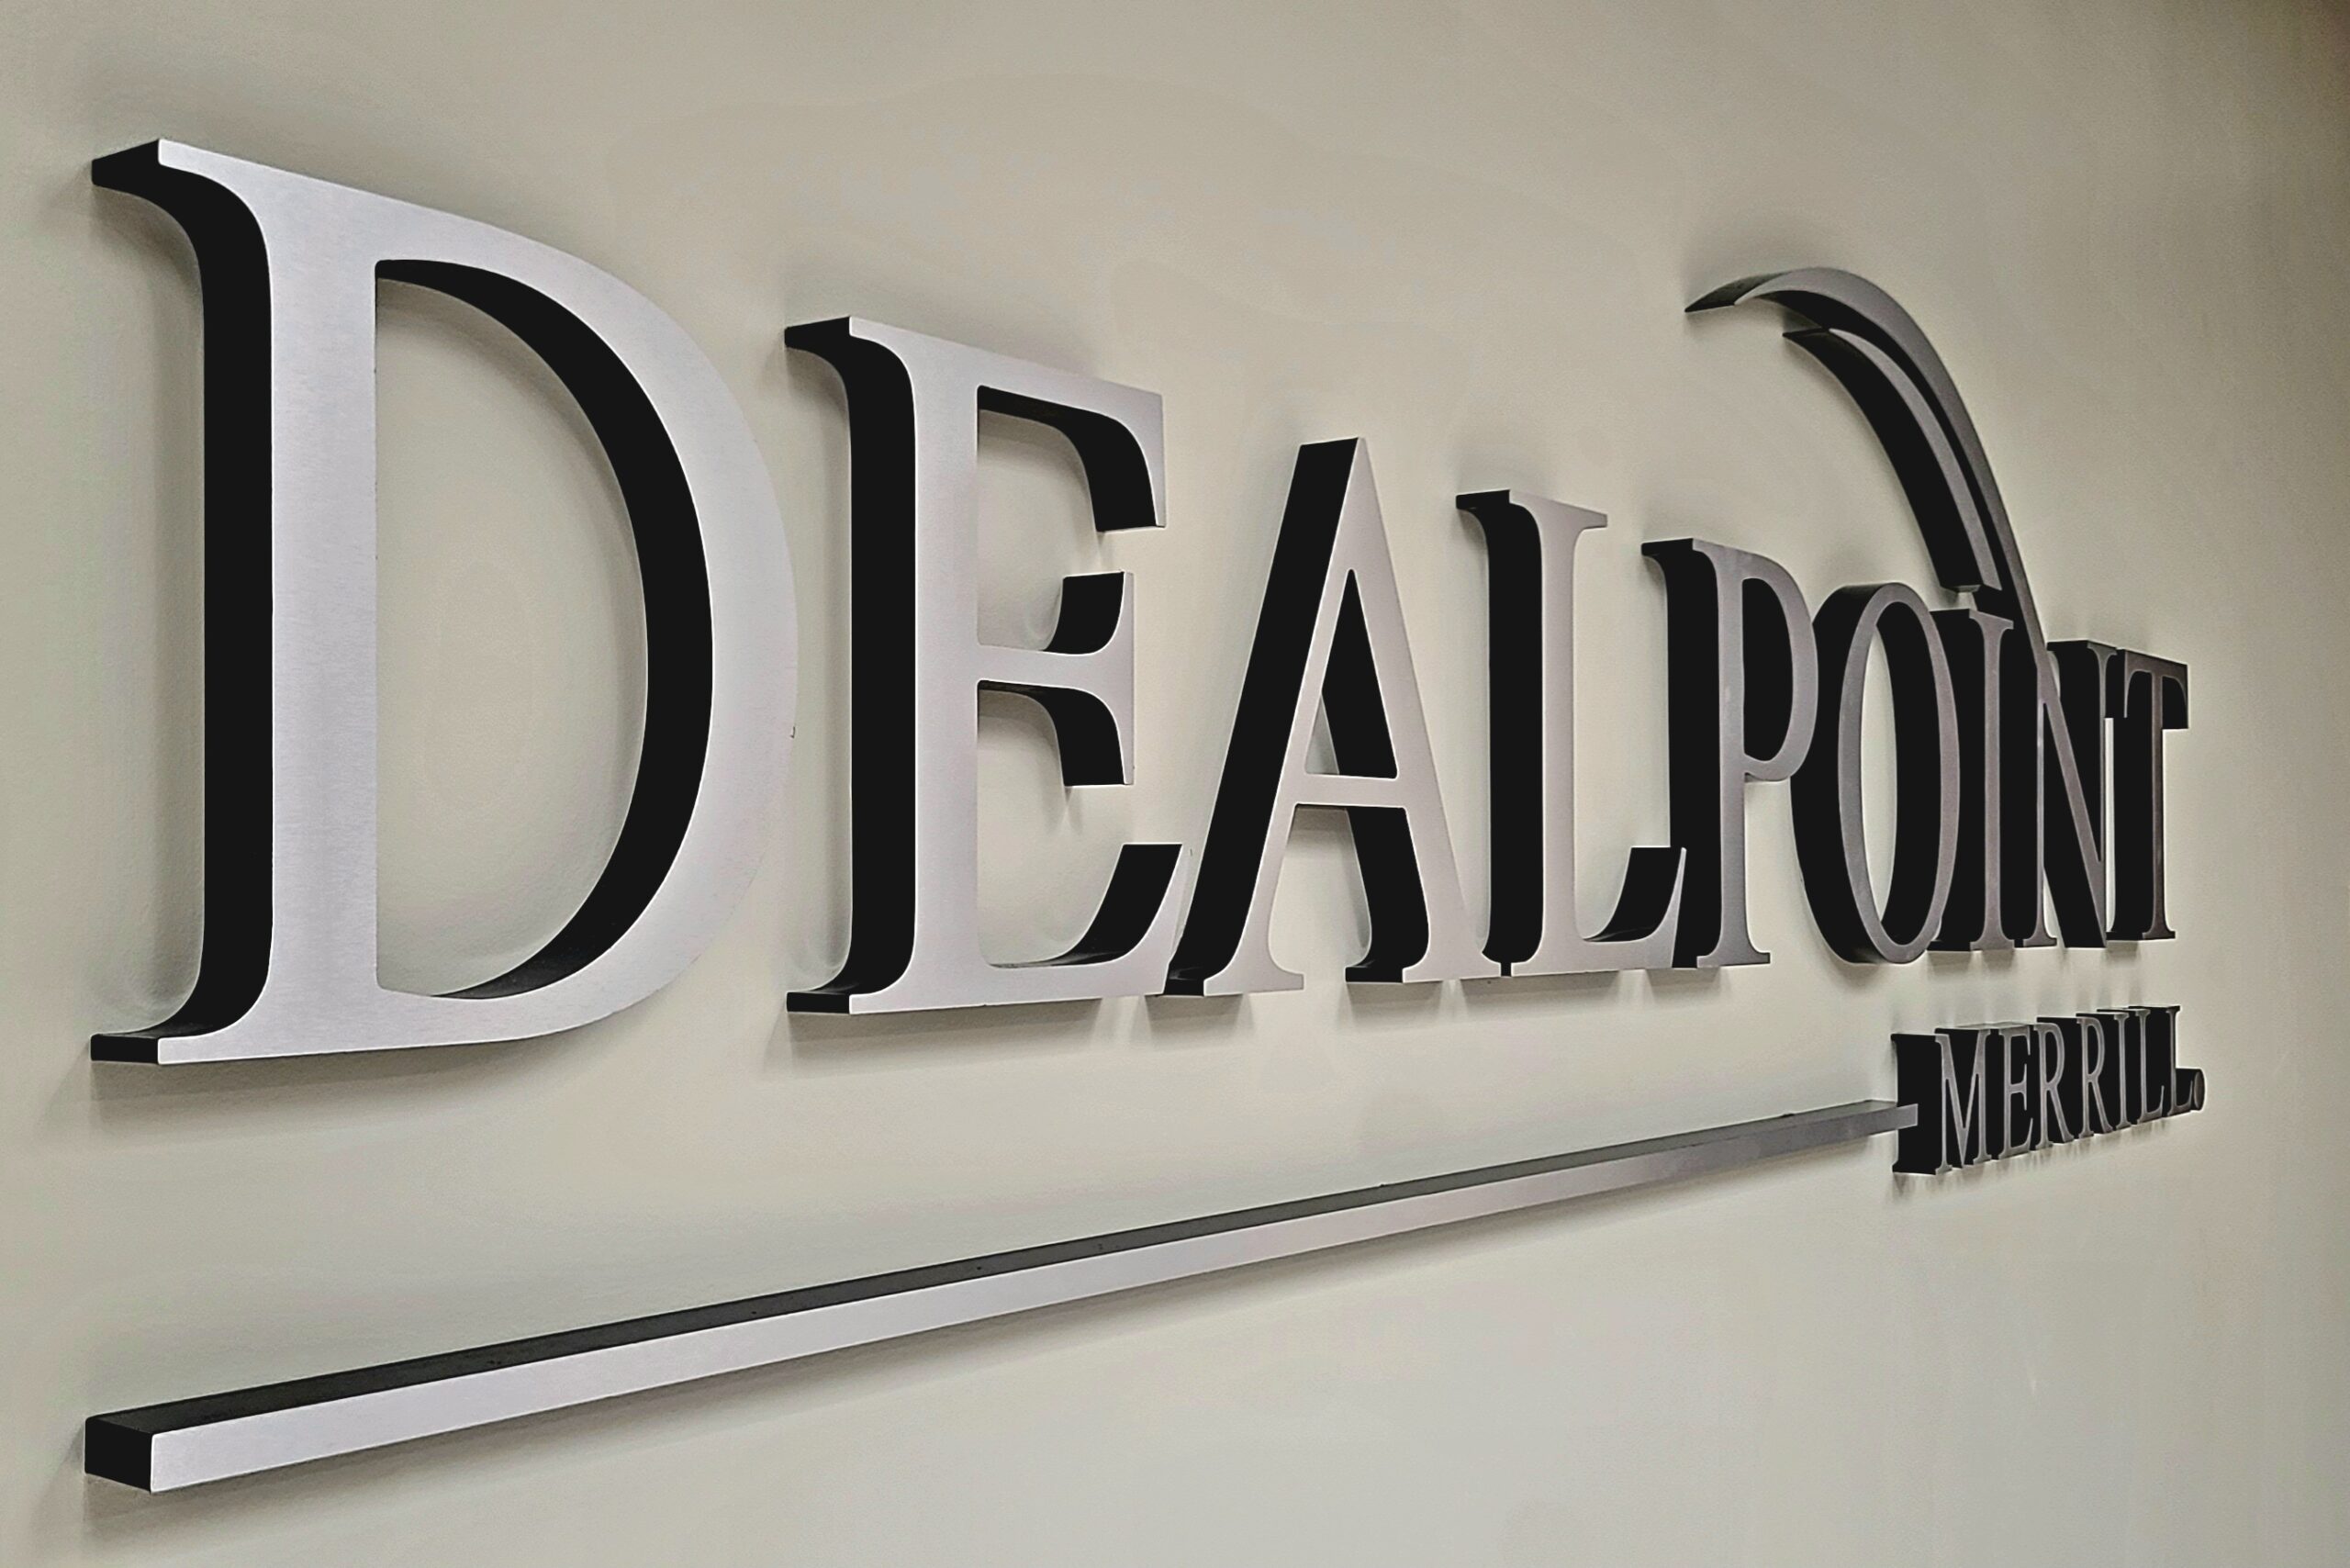 Dealpoint Merrill's lobby sign in the reception area